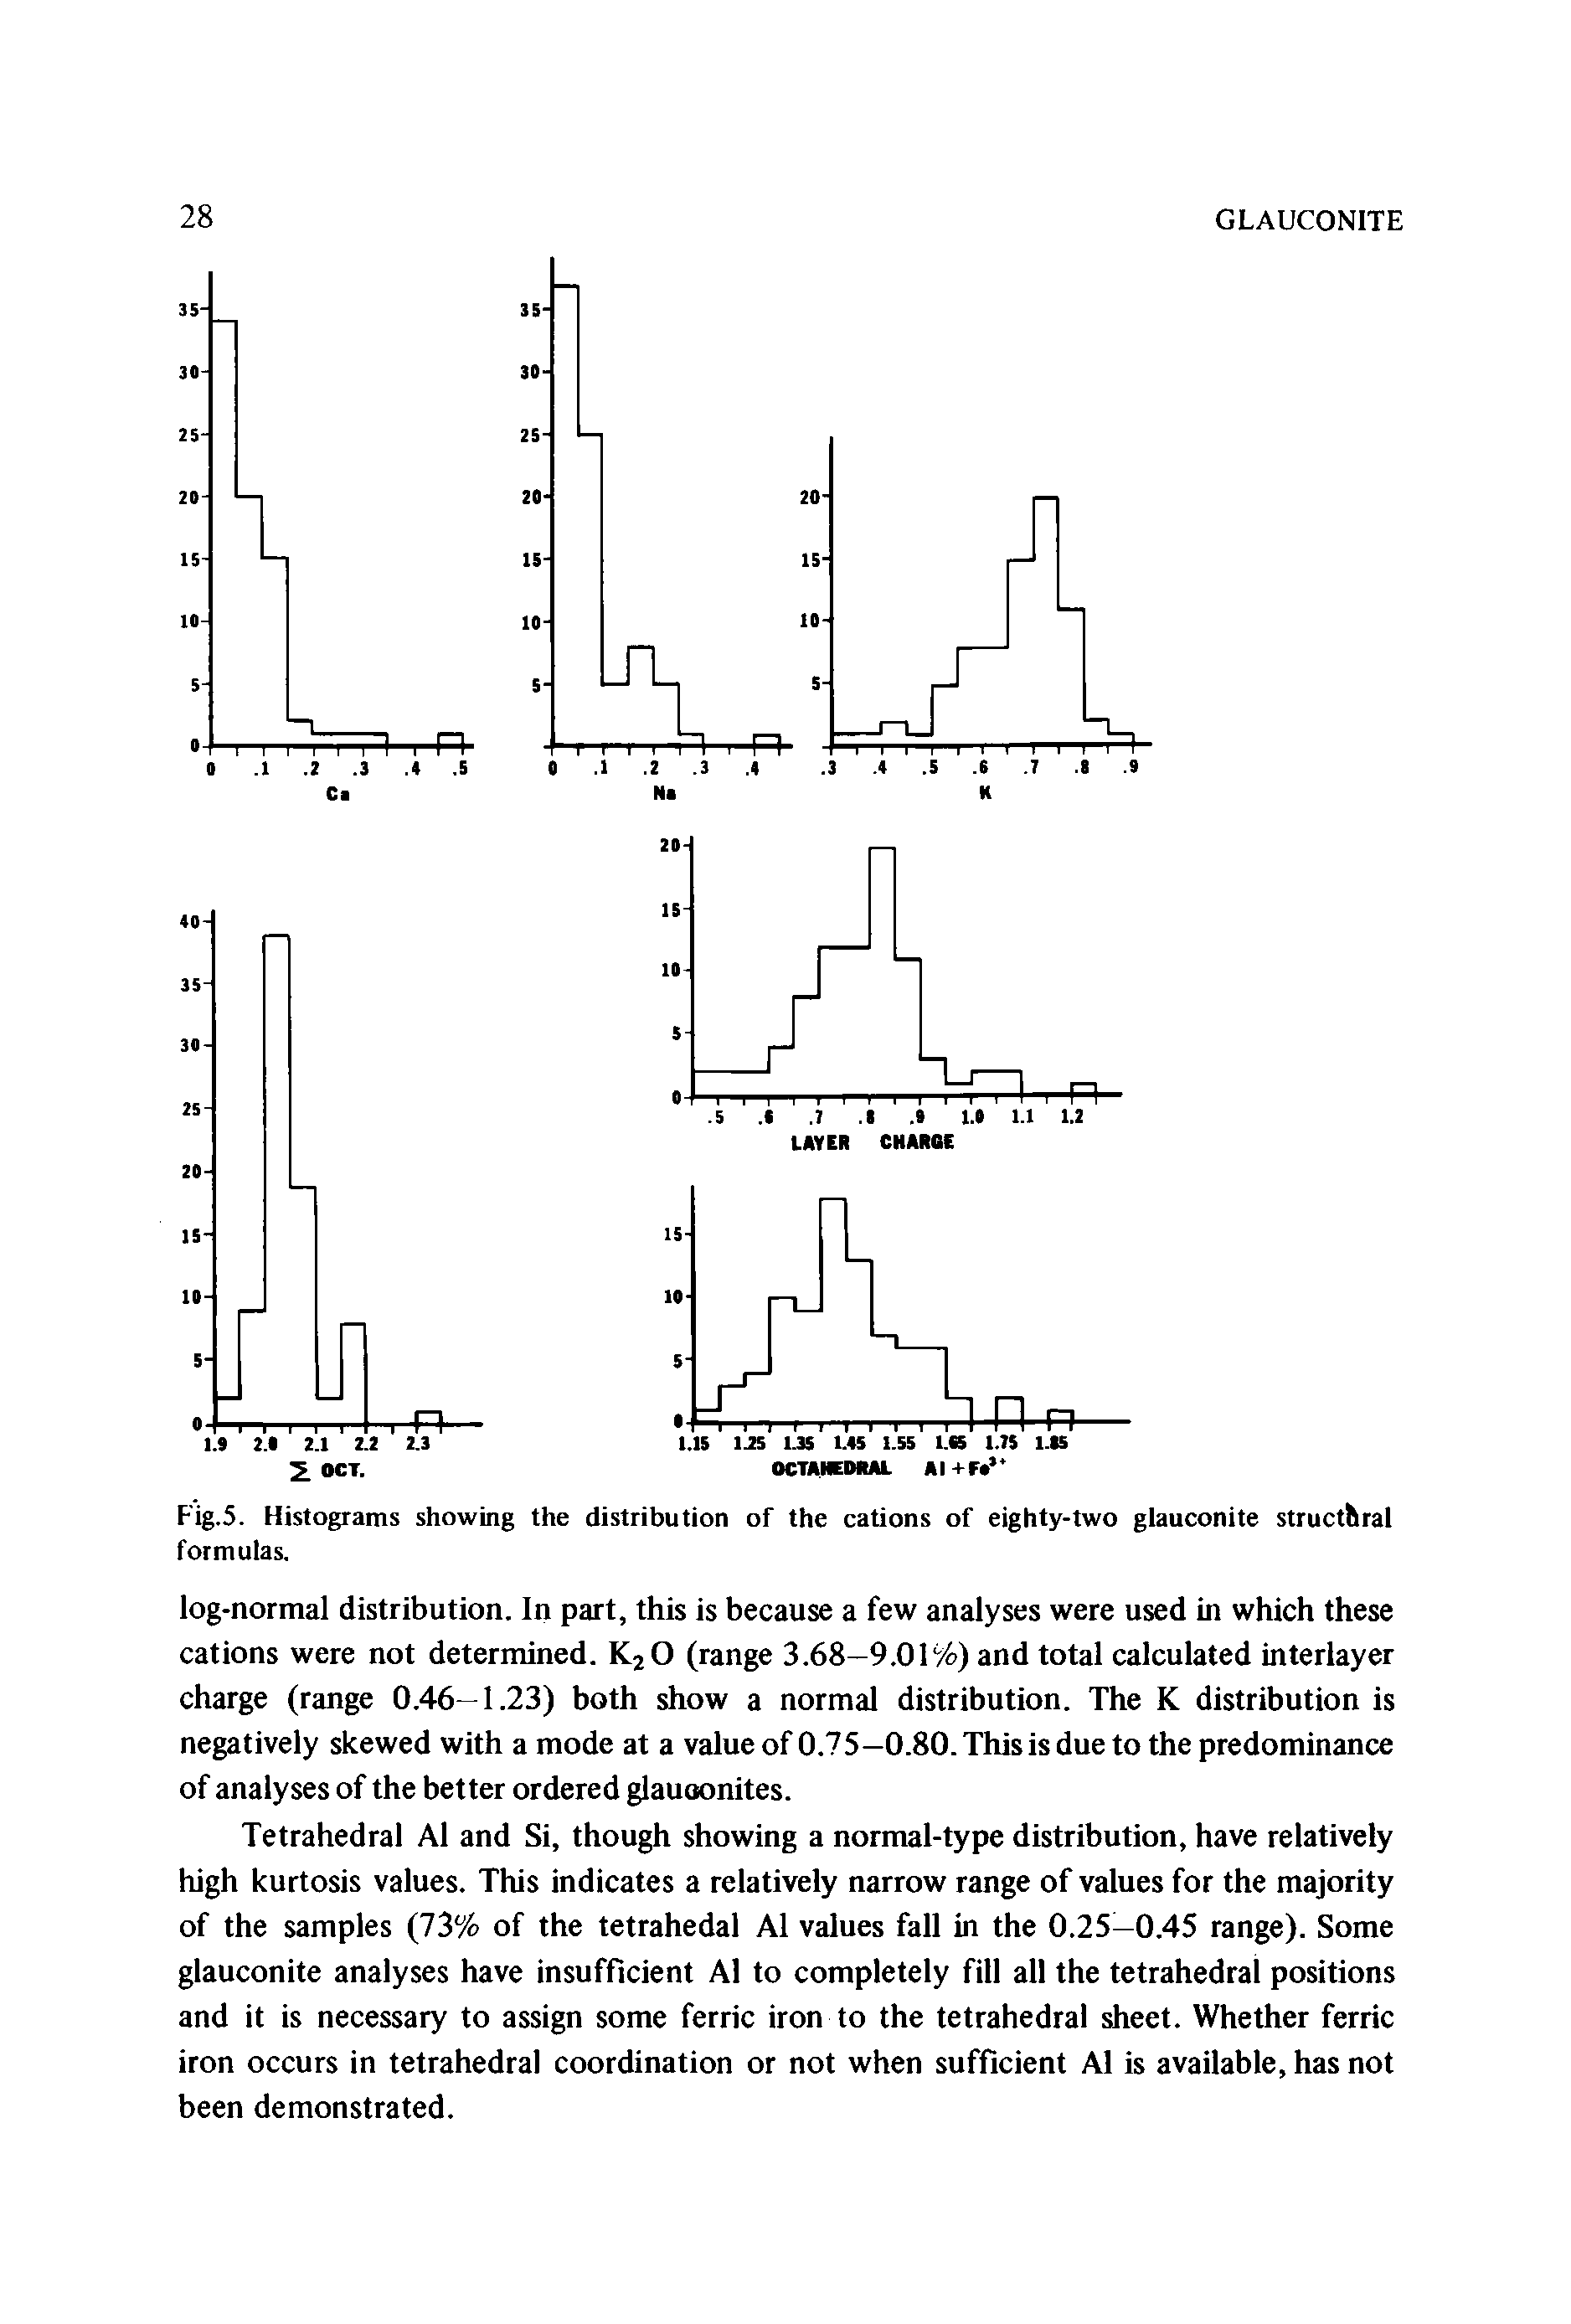 Fig.5. Histograms showing the distribution of the cations of eighty-two glauconite structhral formulas.